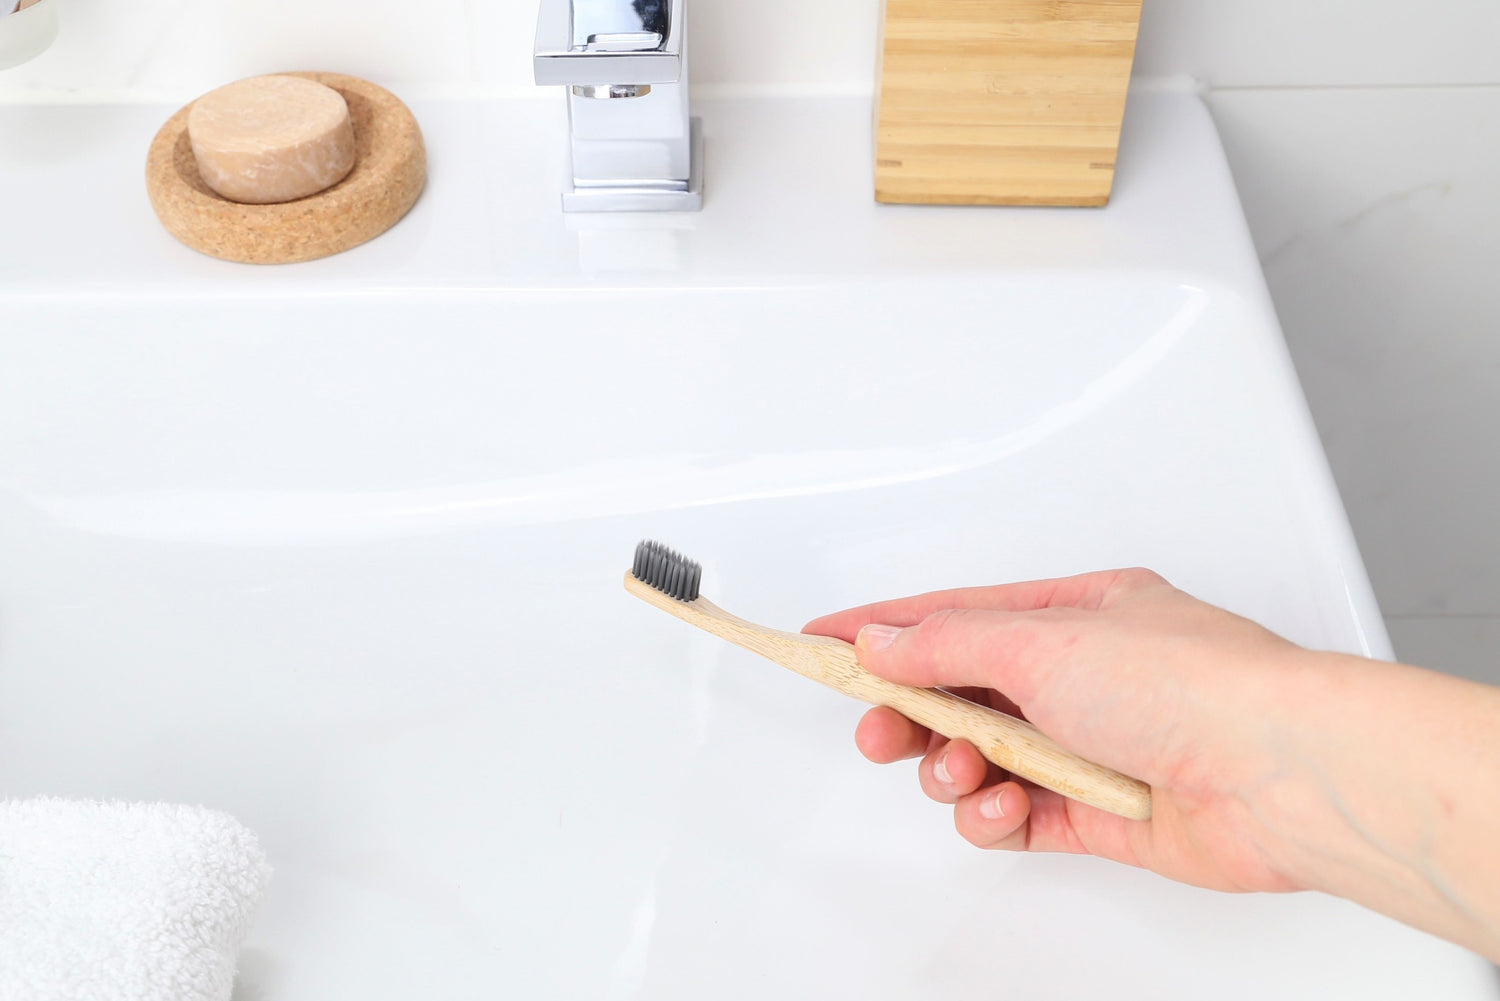 bamboo toothbrushes for adults from Beewise soft charcoal bristles being used in the sink